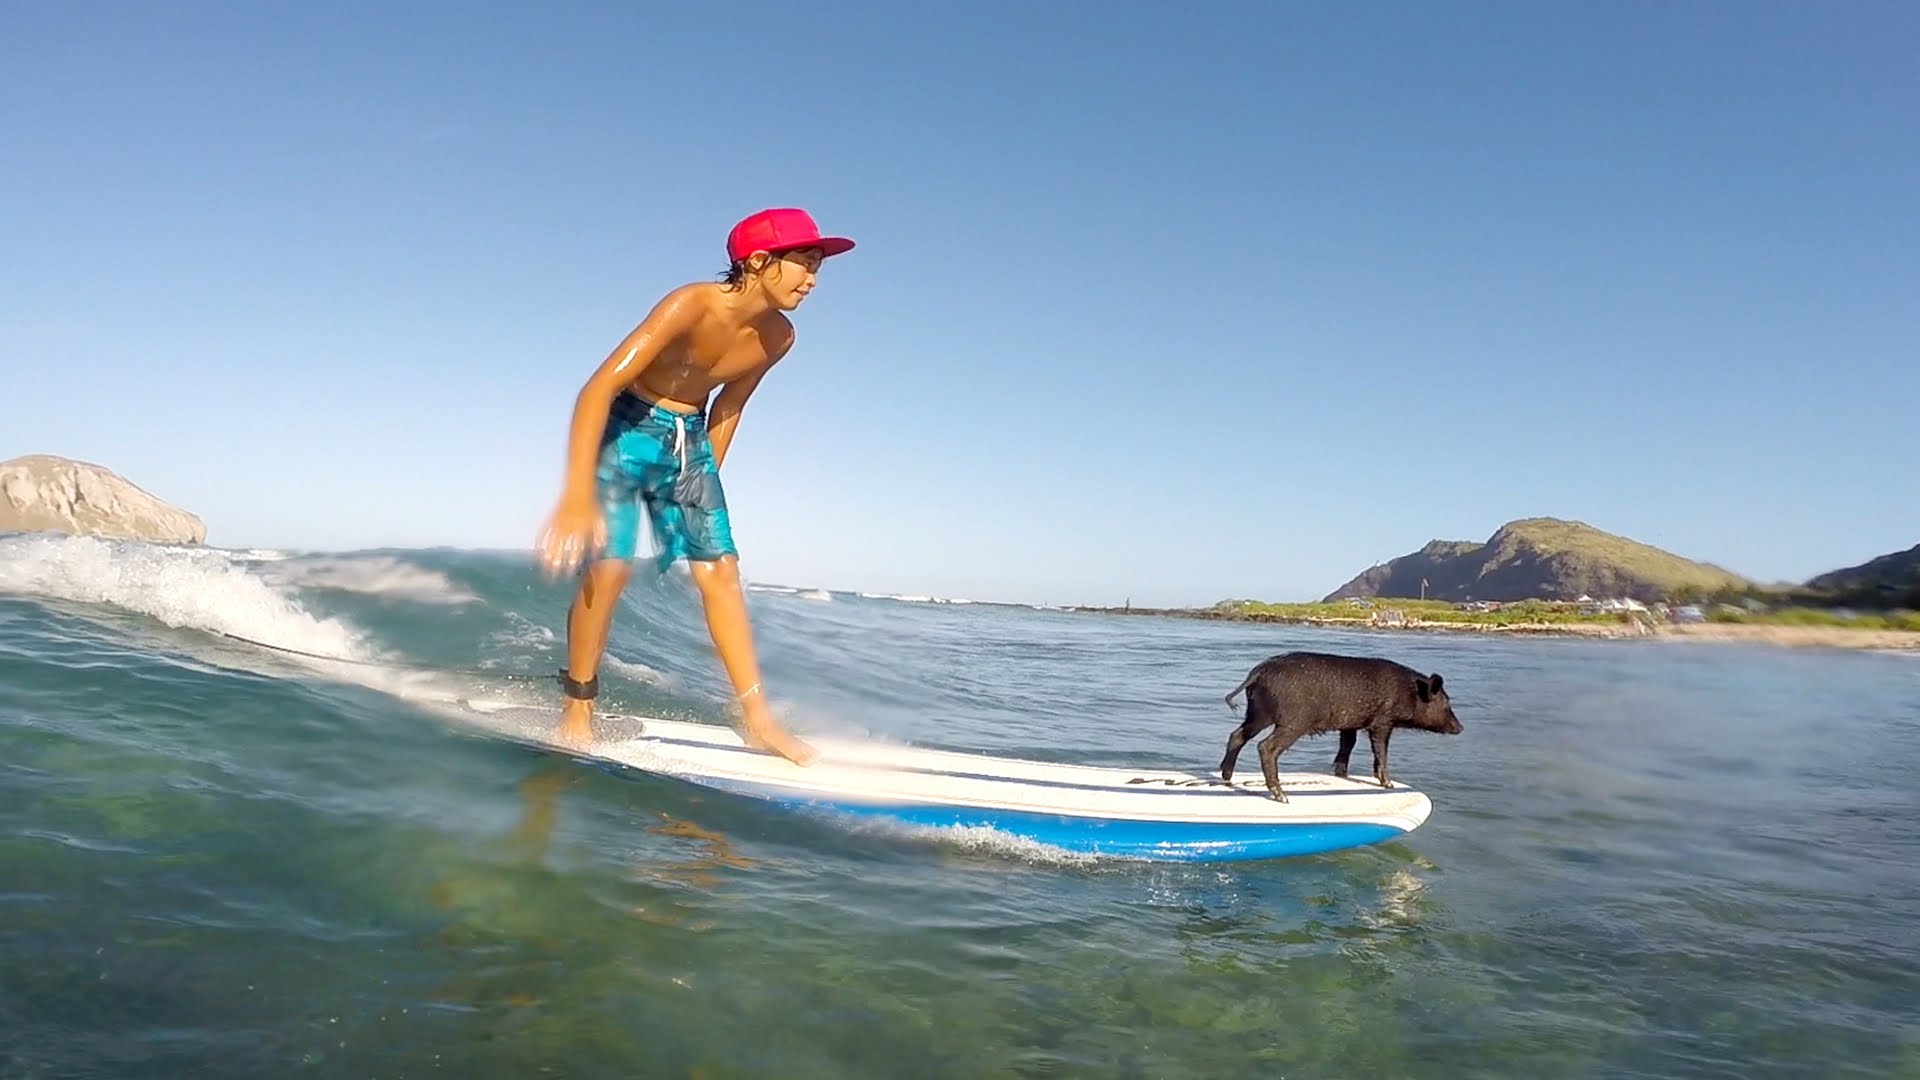 GoPro: Baby Pig Goes Surfing in Hawaii